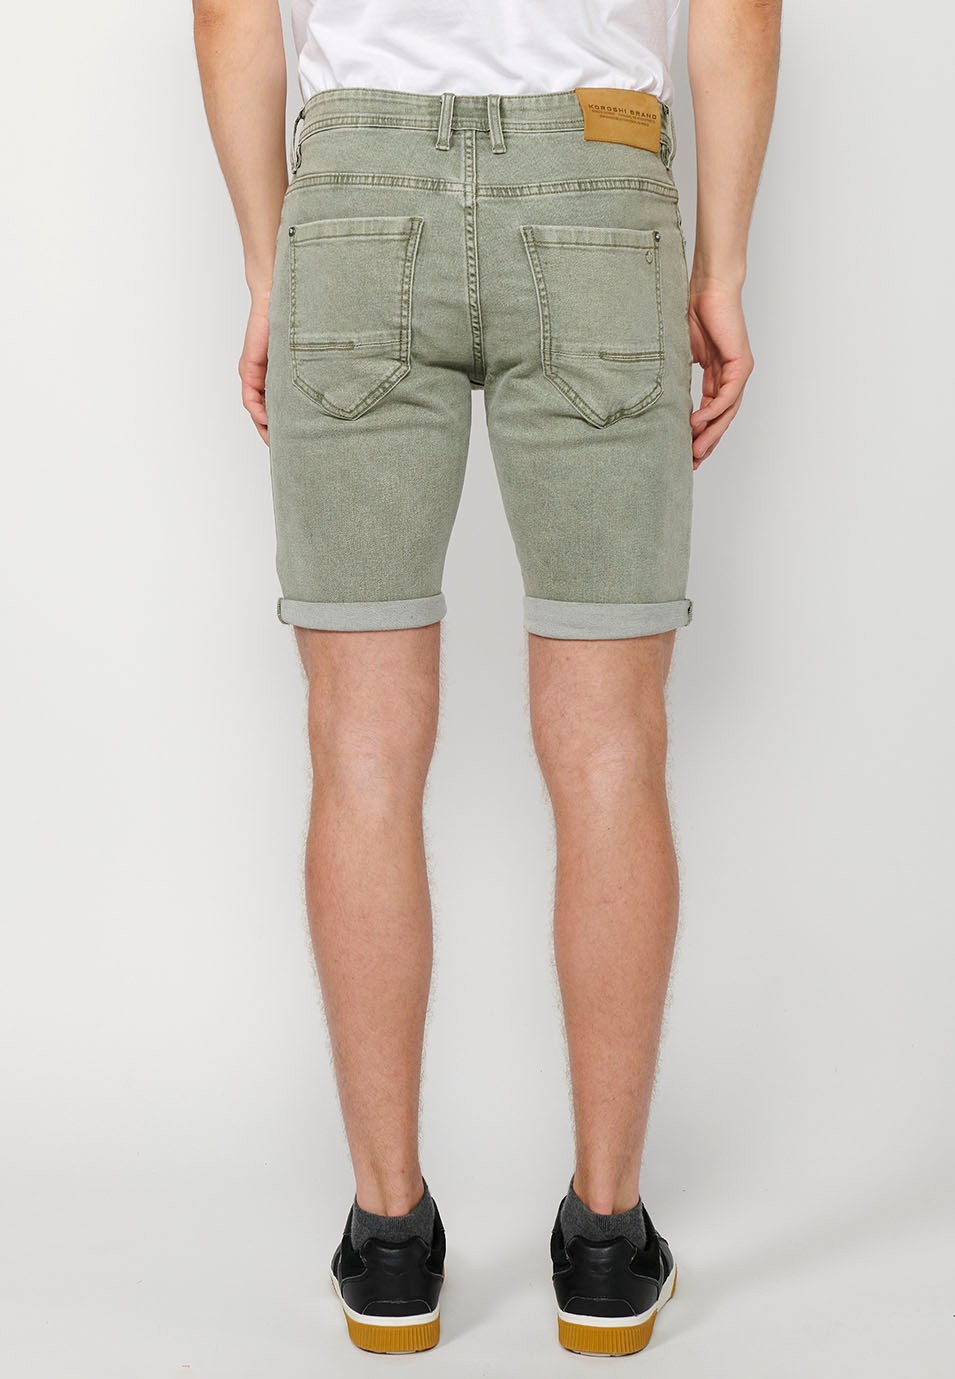 Shorts with a turn-up finish with front zipper and button closure and five pockets, one with a match pocket, in Green for Men 1